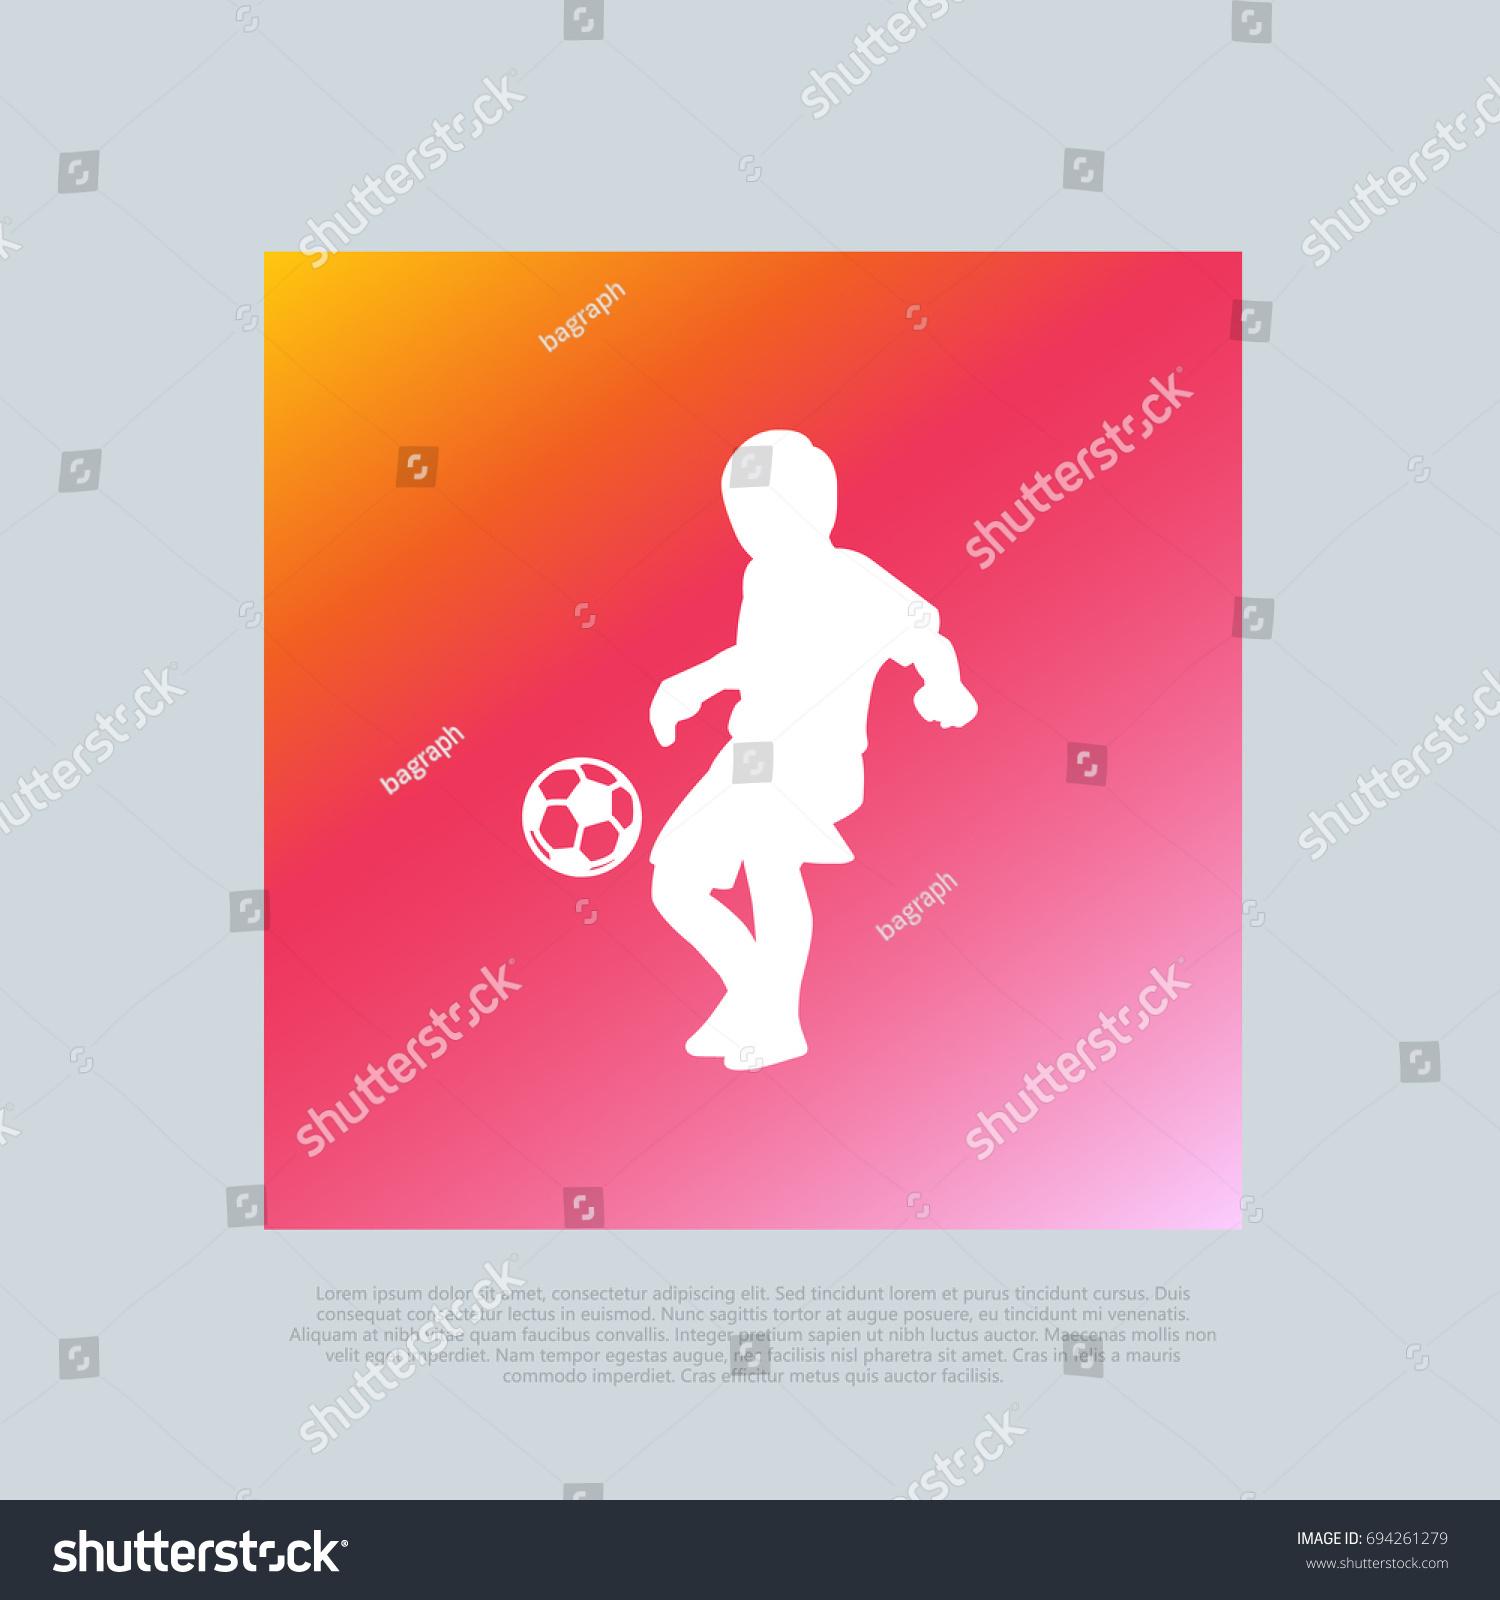 SVG of Junior Soccer or Football. Also useful as favicon, clipart. Compatible with PNG, JPG, AI, CDR, SVG, EPS, PDF. svg